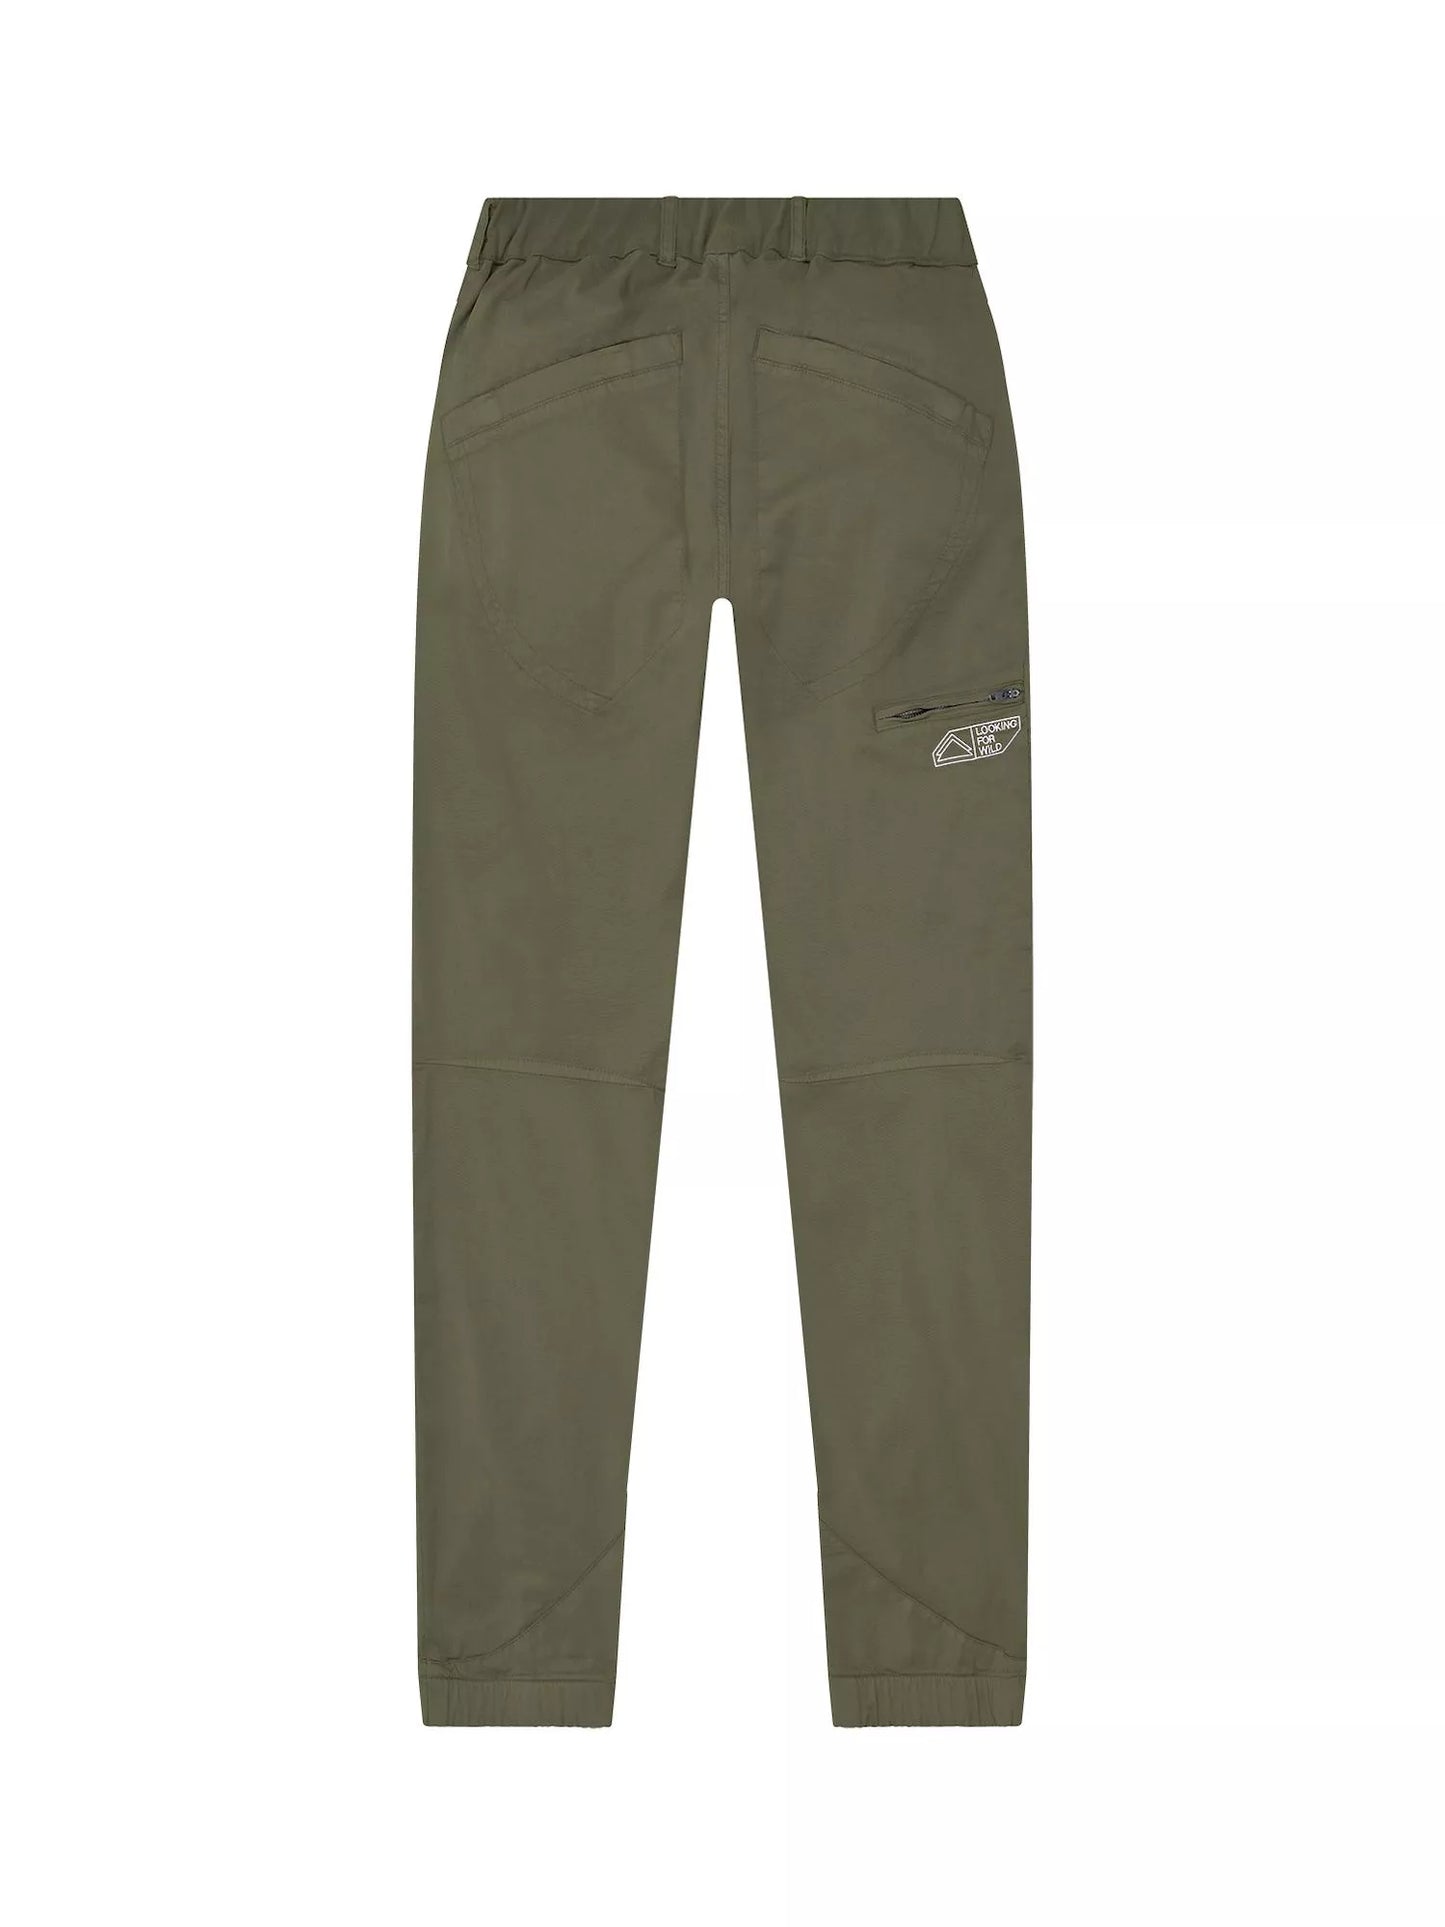 Looking For Wild - Fitz Roy Pant - Olive